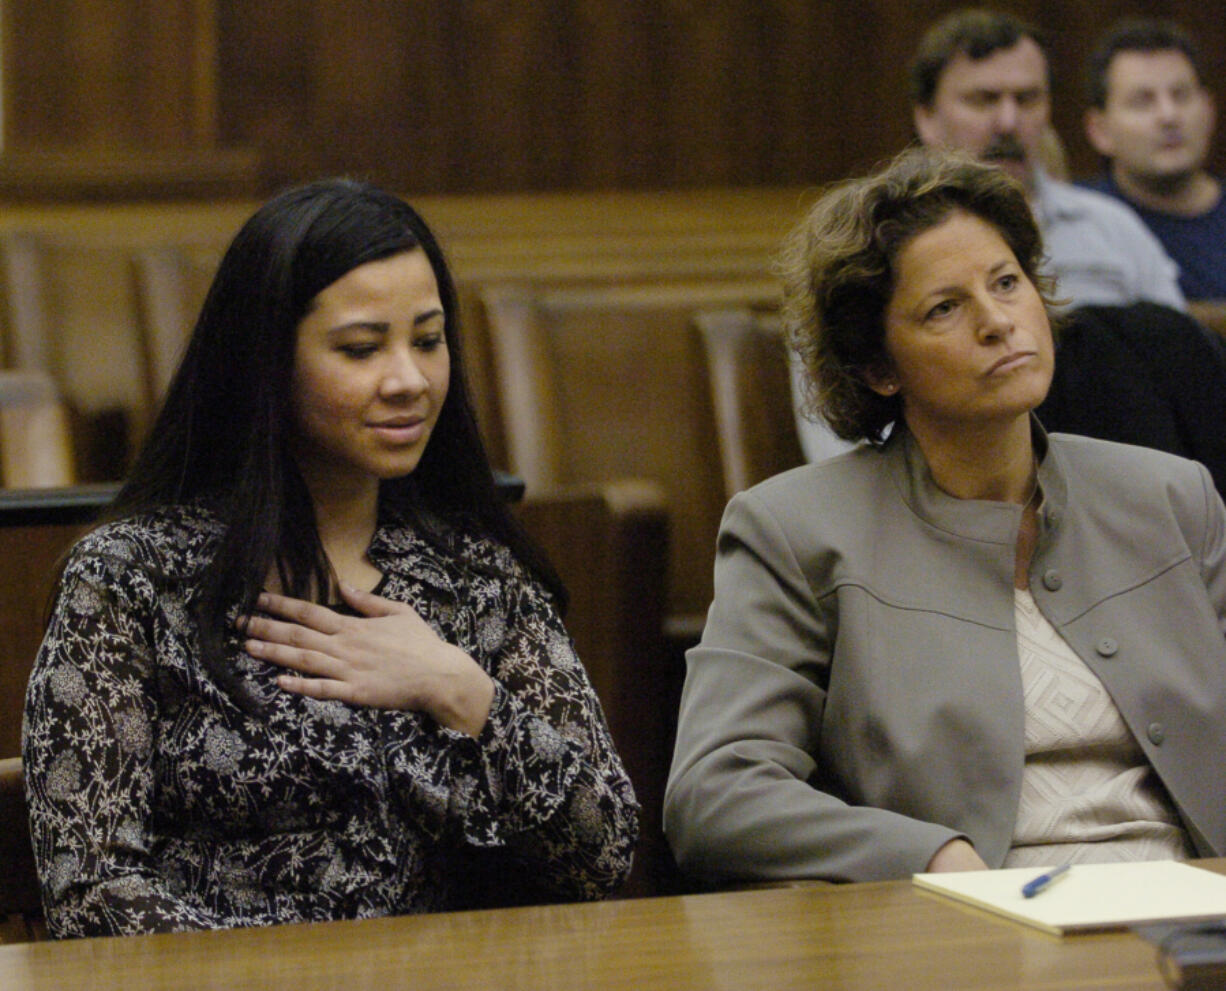 Sophia Johnson reacts in November 2005 to a jury acquitting her of first-degree murder in the death of her mother-in-law. Sitting next to her is Therese Lavallee, her lawyer, who won the retrial of her murder conviction.